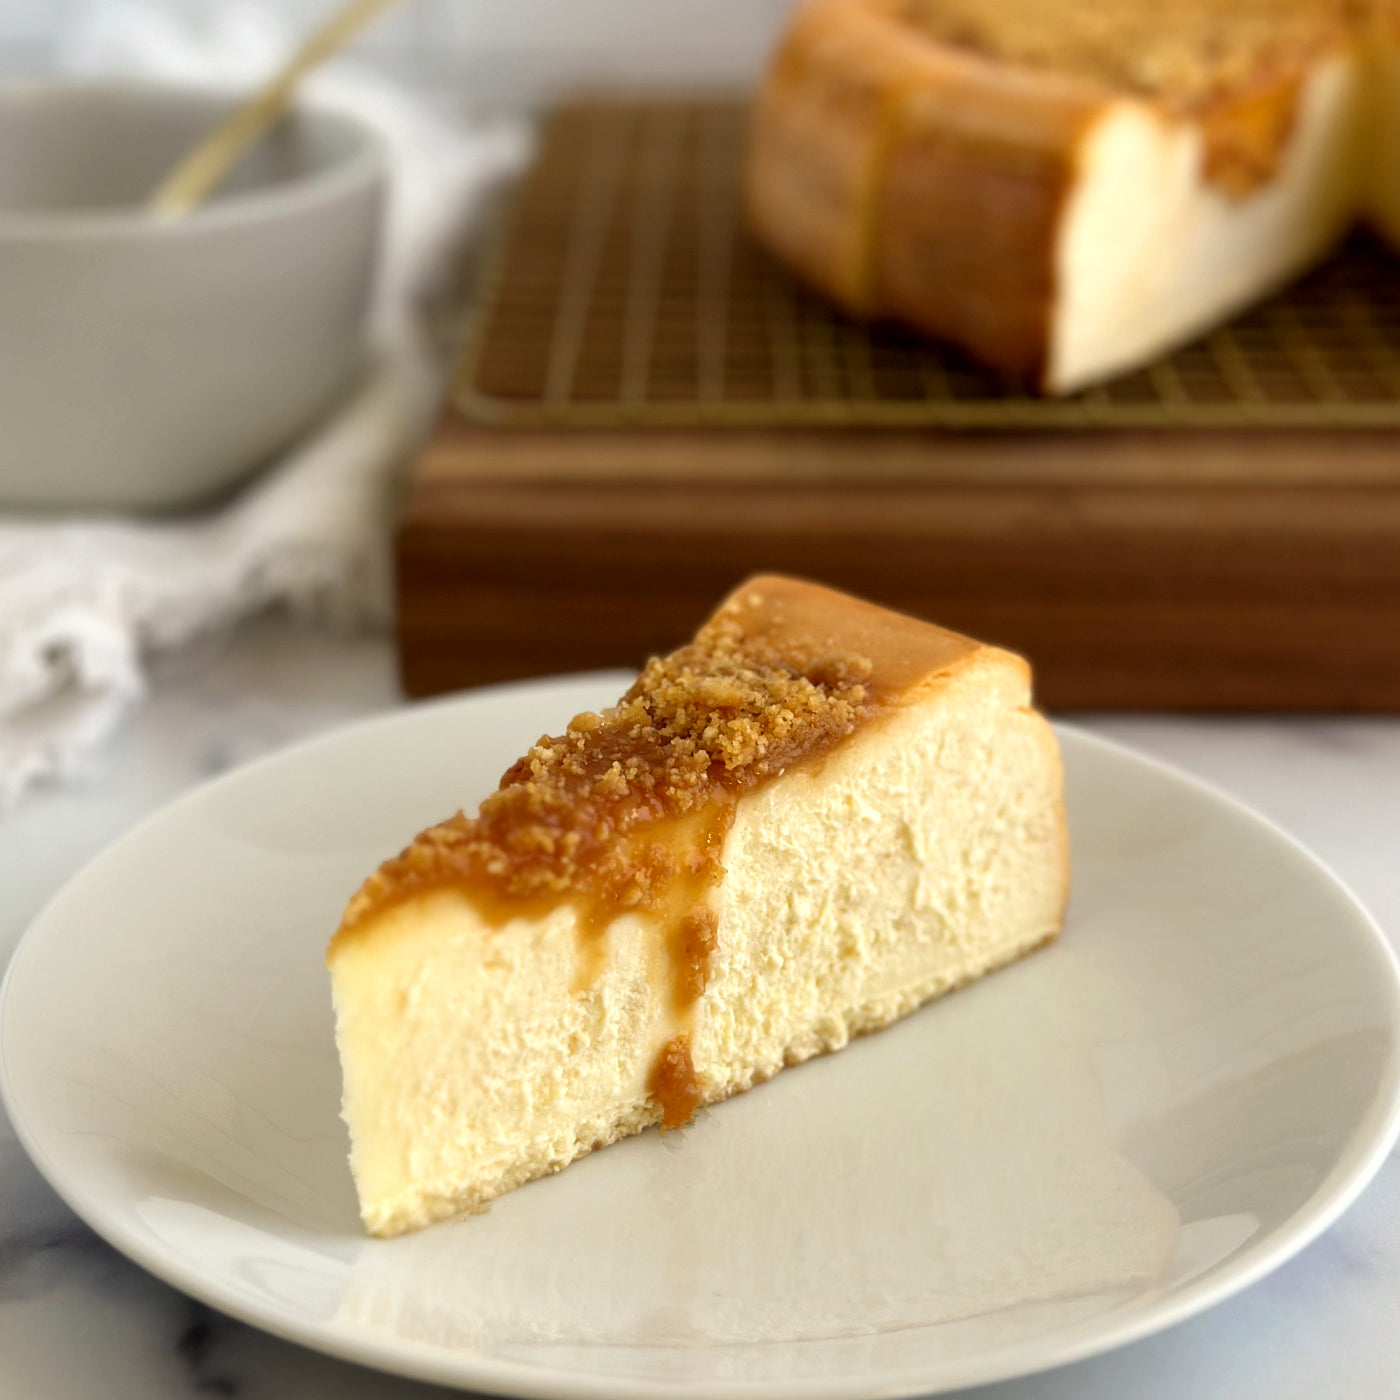 Velvety slice of Salted Caramel Cheesecake with a layer of salted caramel and cookie crumbles on top and dripping over the side.